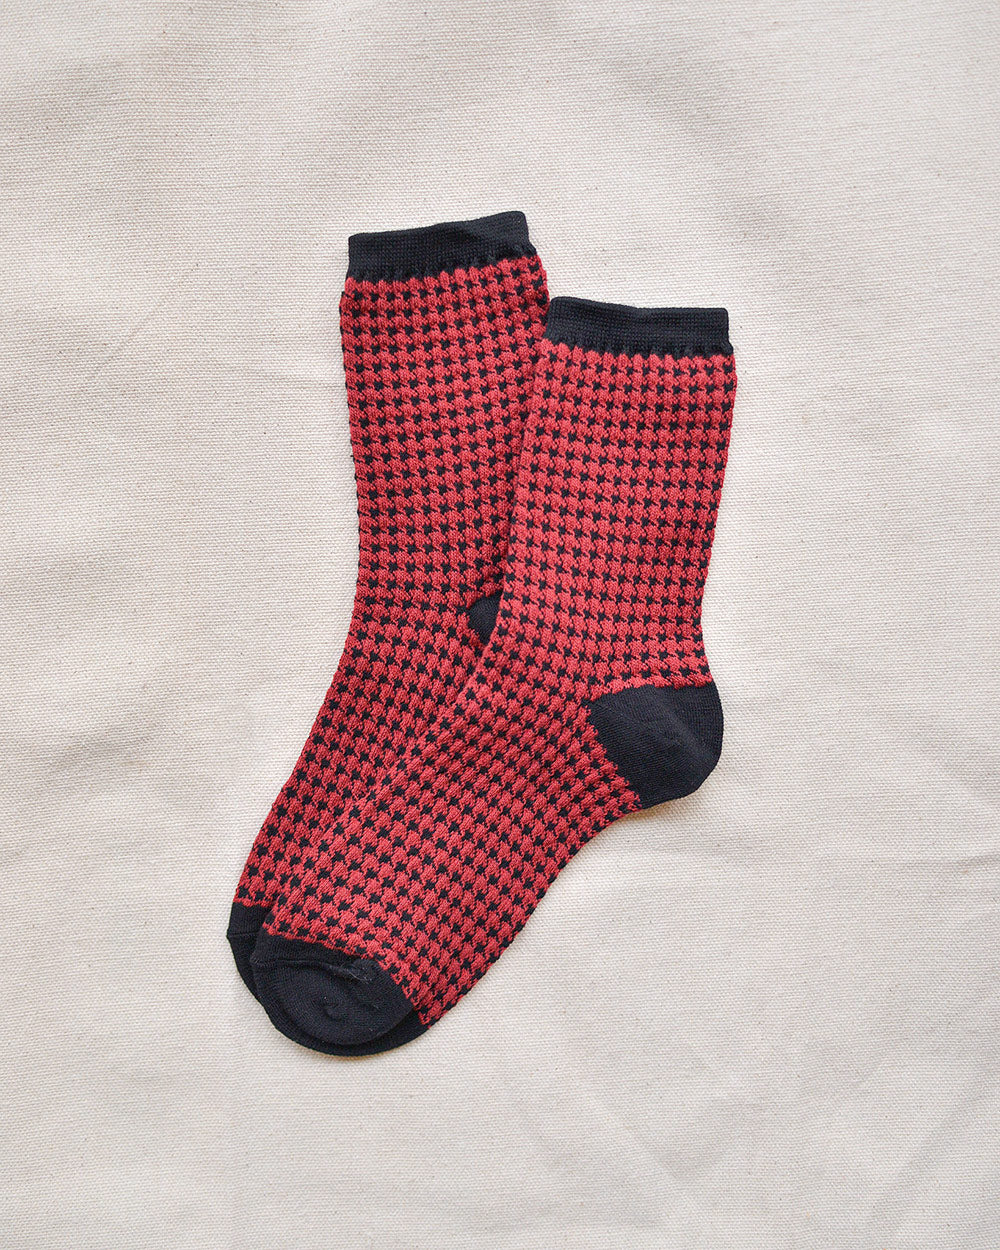 Classic Wool Ankle Socks - Red